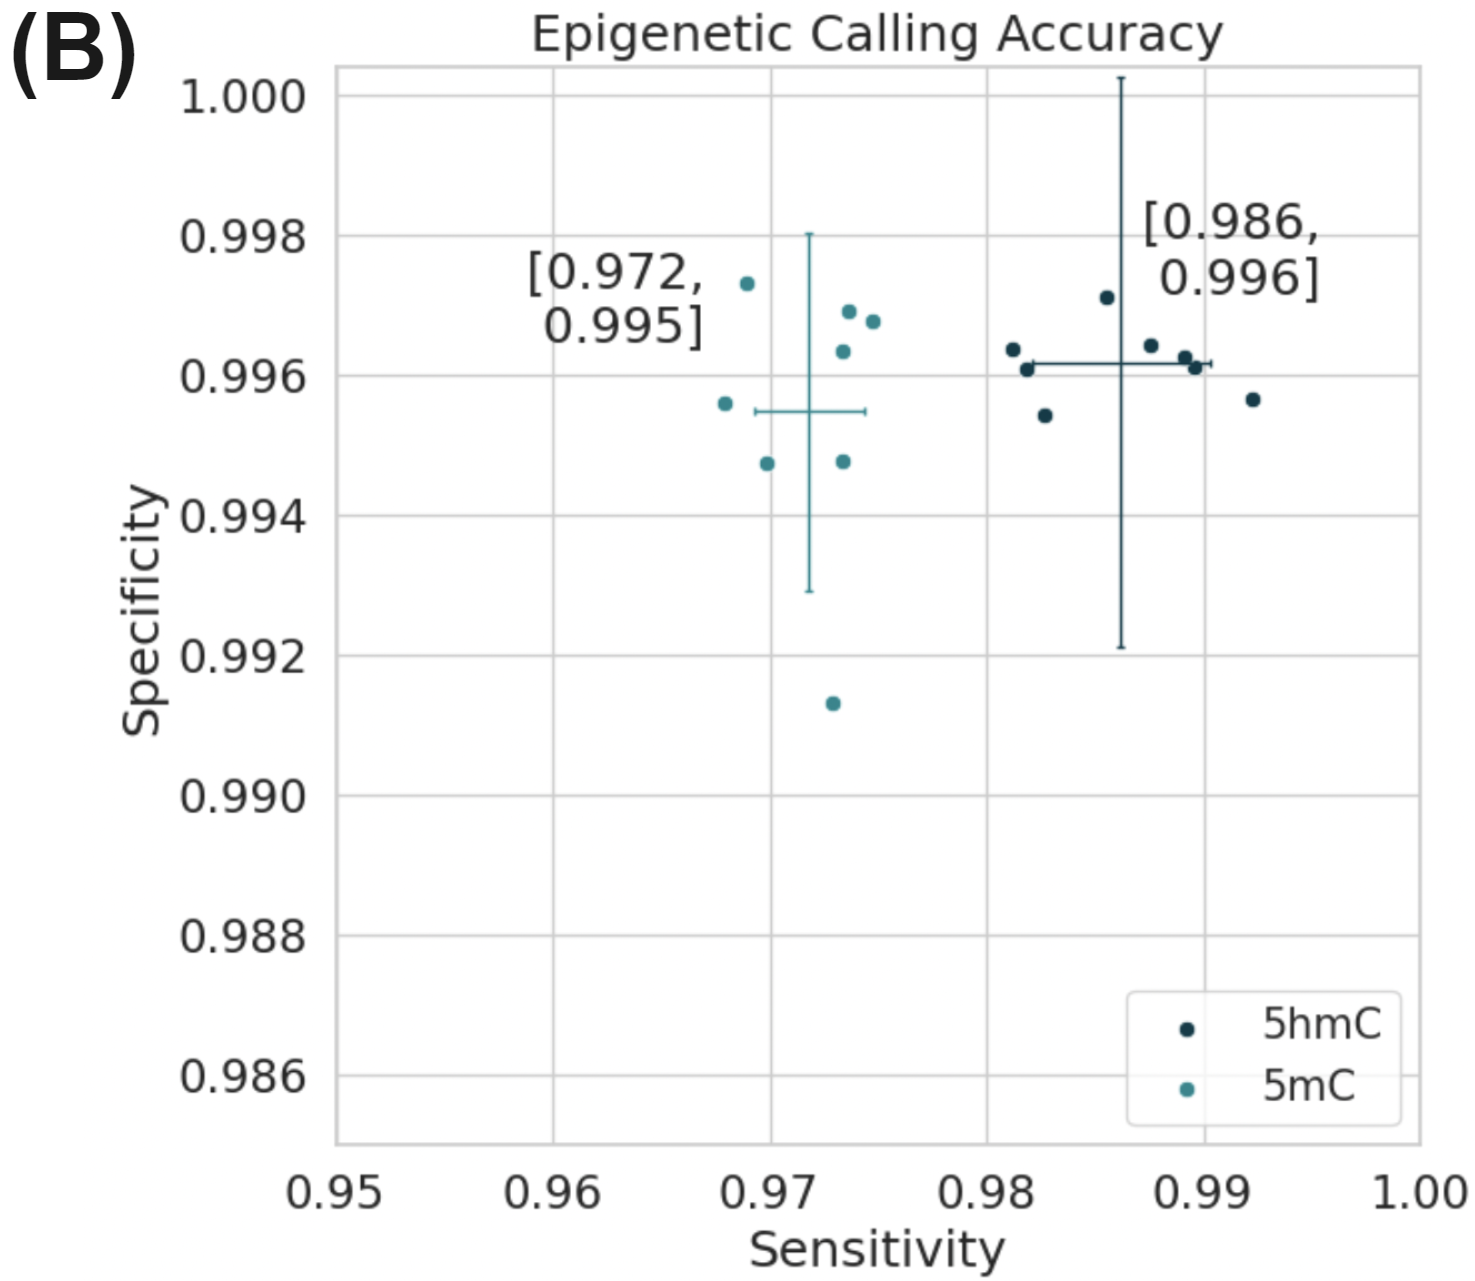 Epigenetic calling accuracy achieved with biomodal duet evoC for 5mC and 5hmC